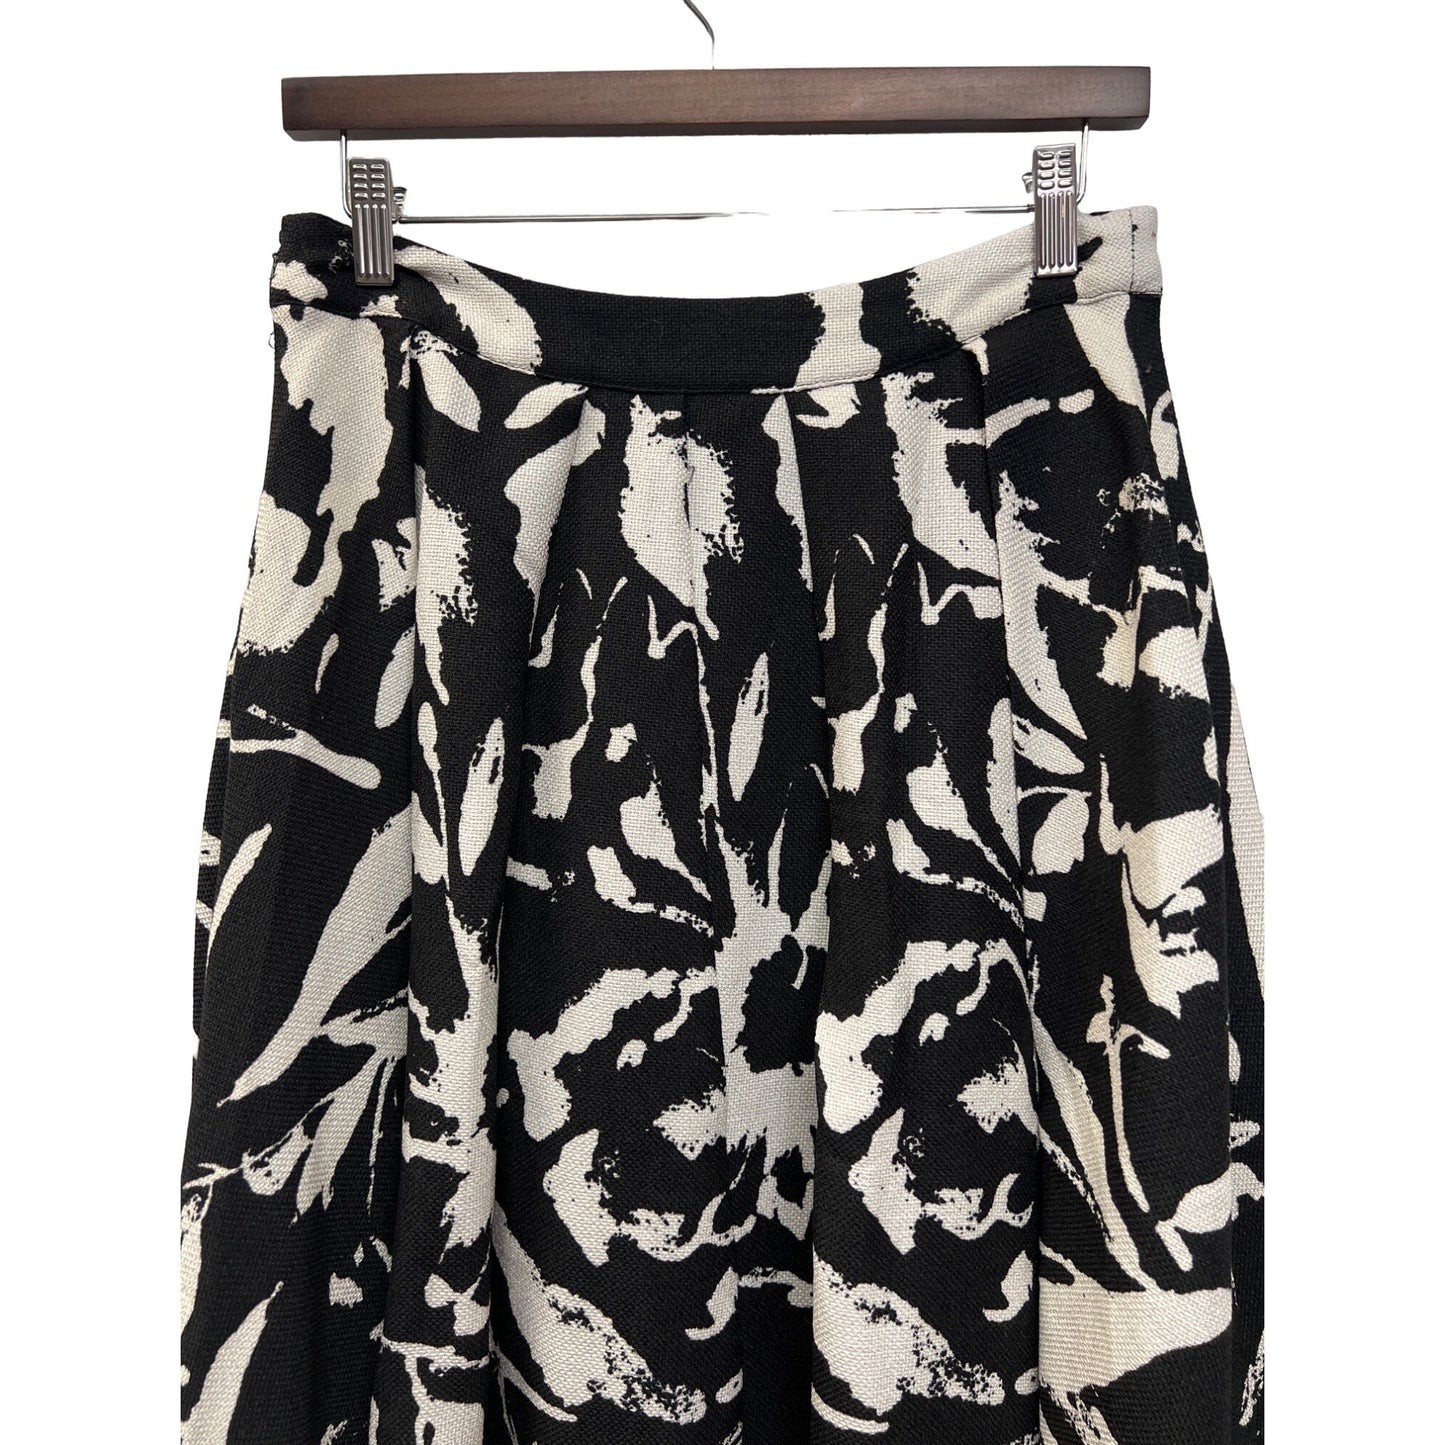 Lucy Paris Floral Pleated Midi Skirt